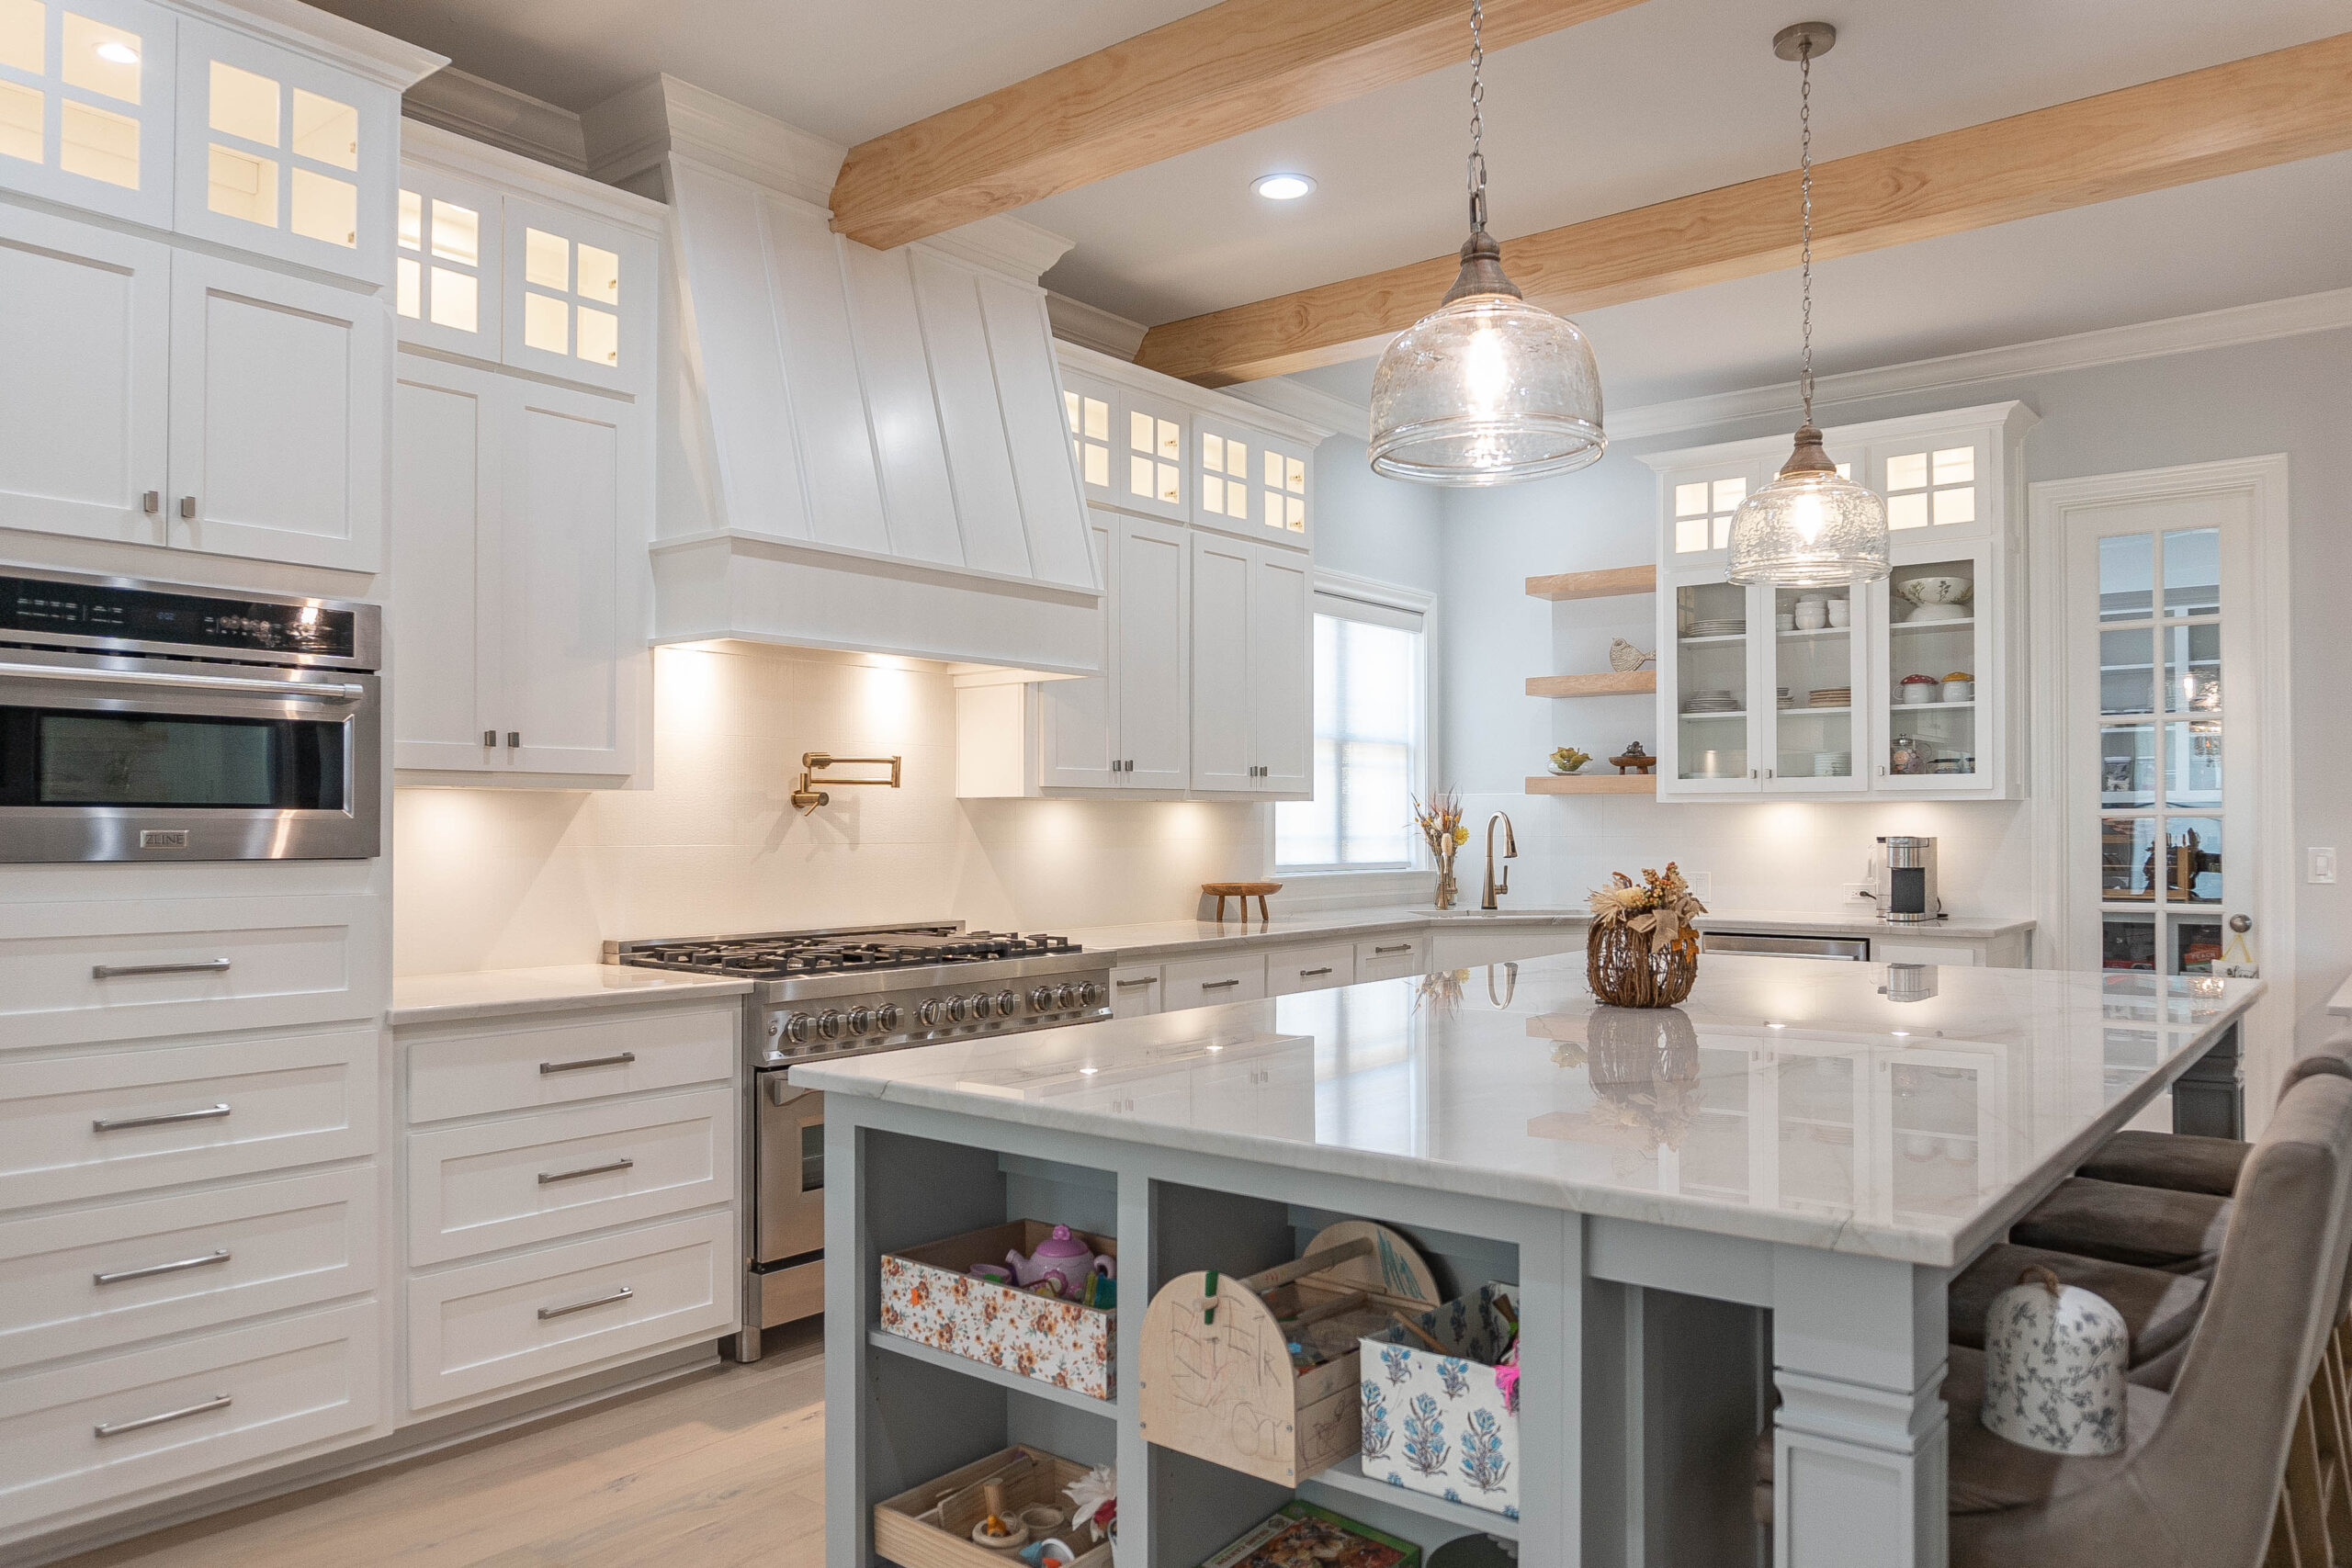 Esplanade Kitchen with natural wood stain ceiling beams and floating shelving with white cabinets glass panel windows tan tile flooring white marble counter top island